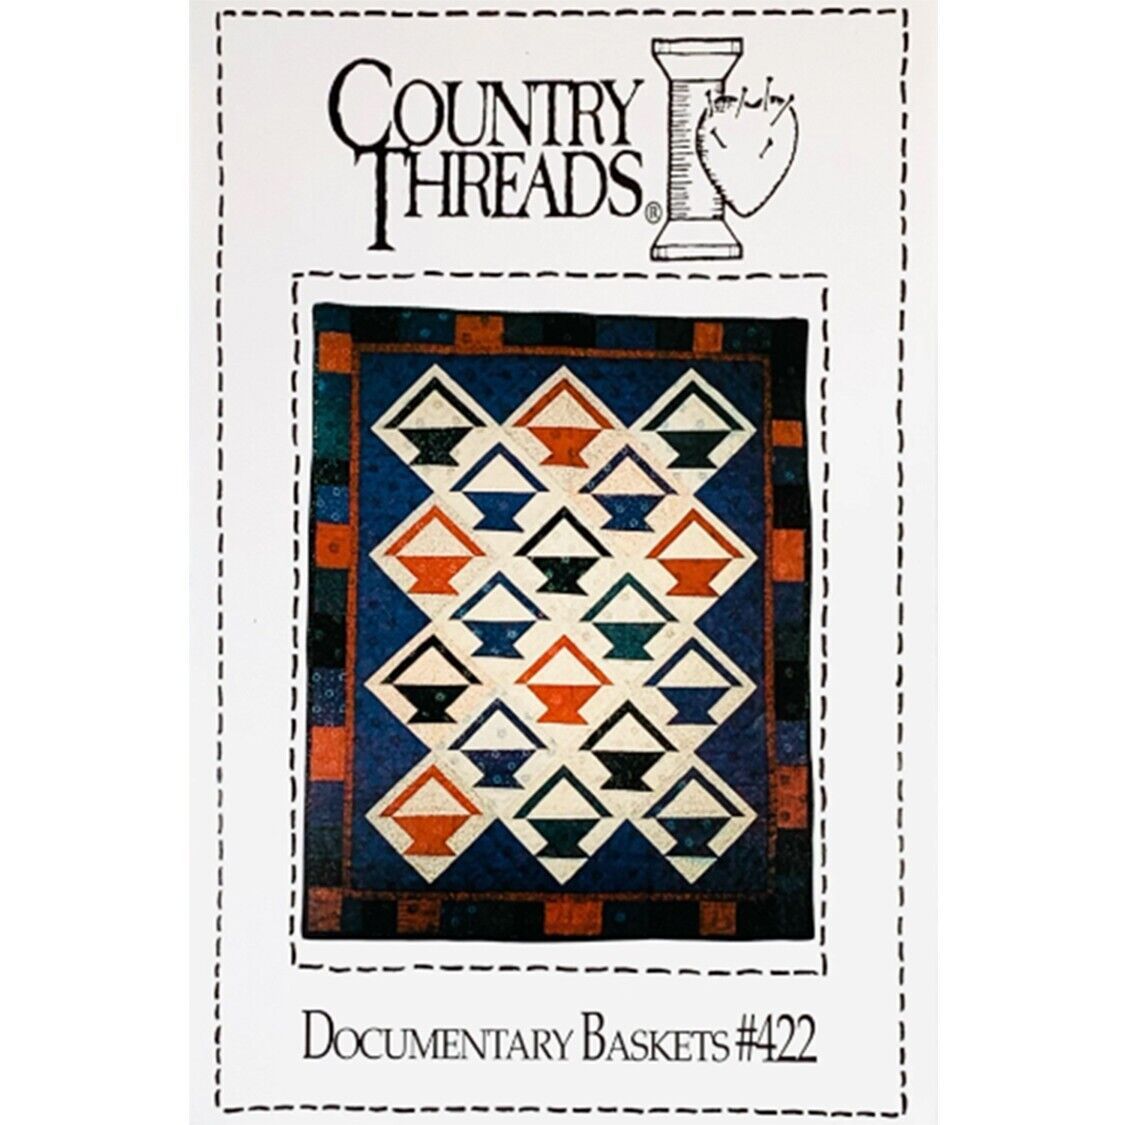 Documentary Baskets Quilt PATTERN 422 by Country Threads Basket Quilt Pattern - $8.99